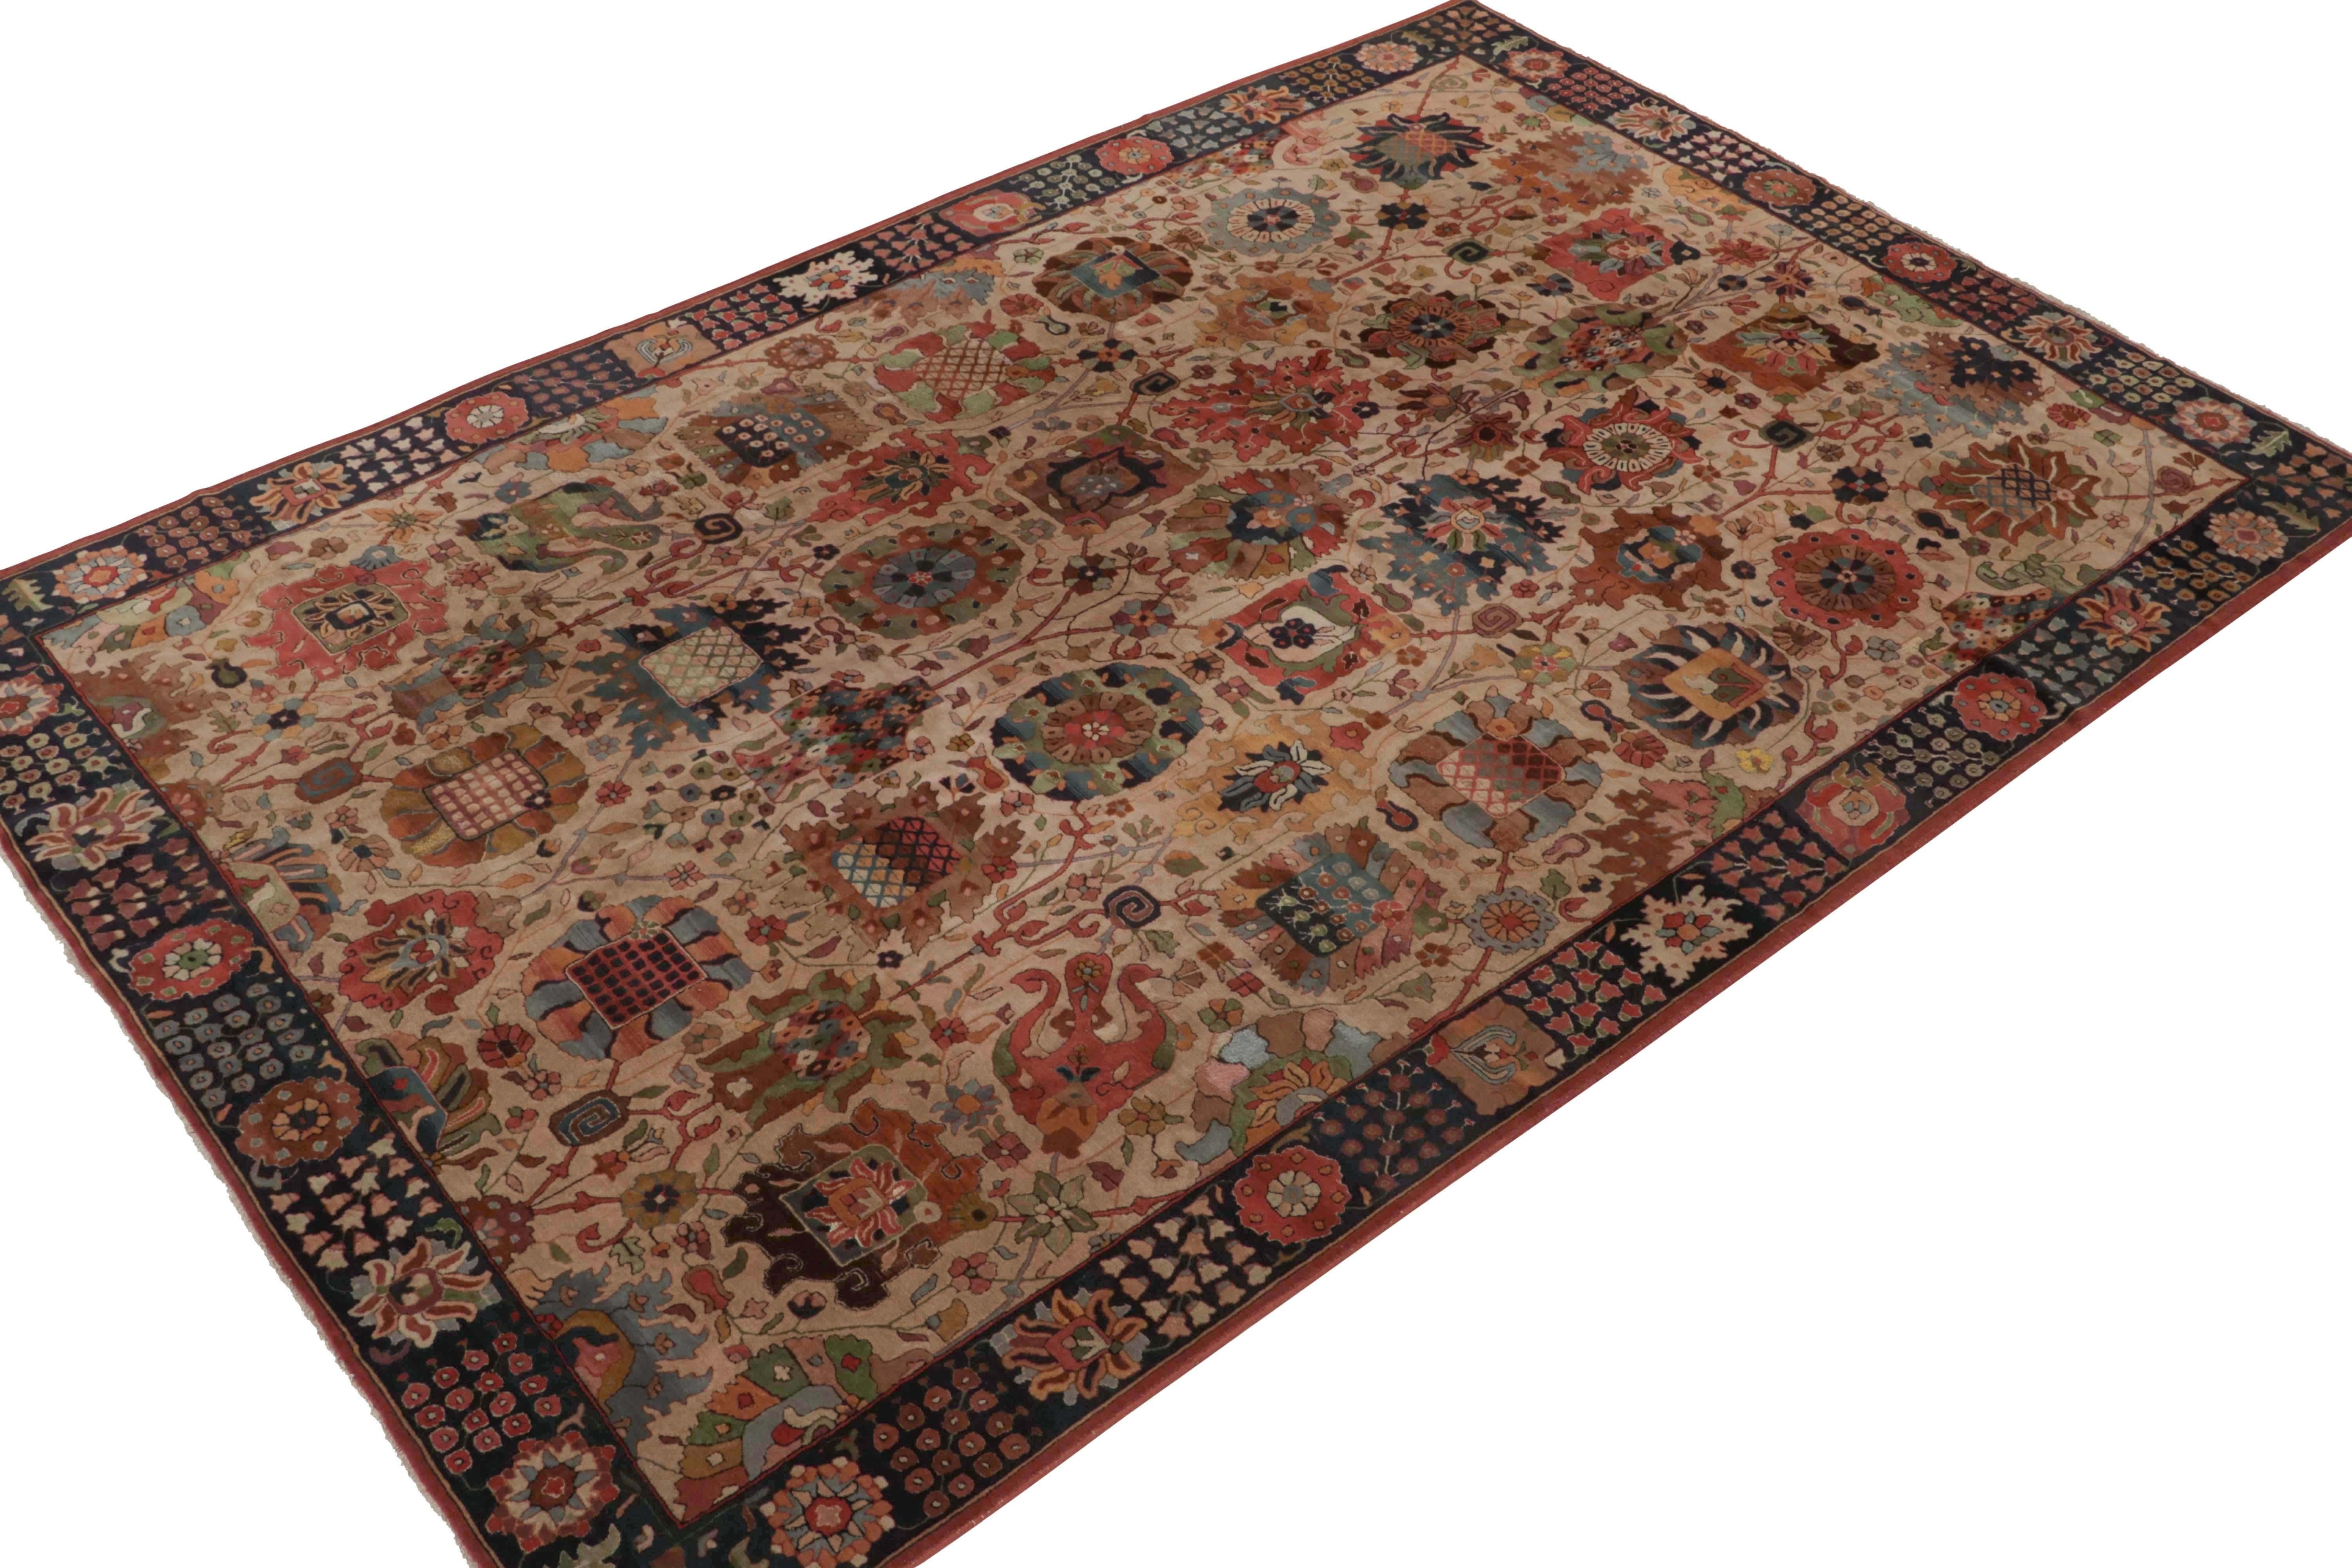 A rare 8x12 antique hand-hooked rug of German provenance, handmade in wool circa 1920-1940. 

This collectible piece enjoys floral patterns in rust-red and green on a beige backdrop within a dark-blue border. Keen eyes will note the intricate